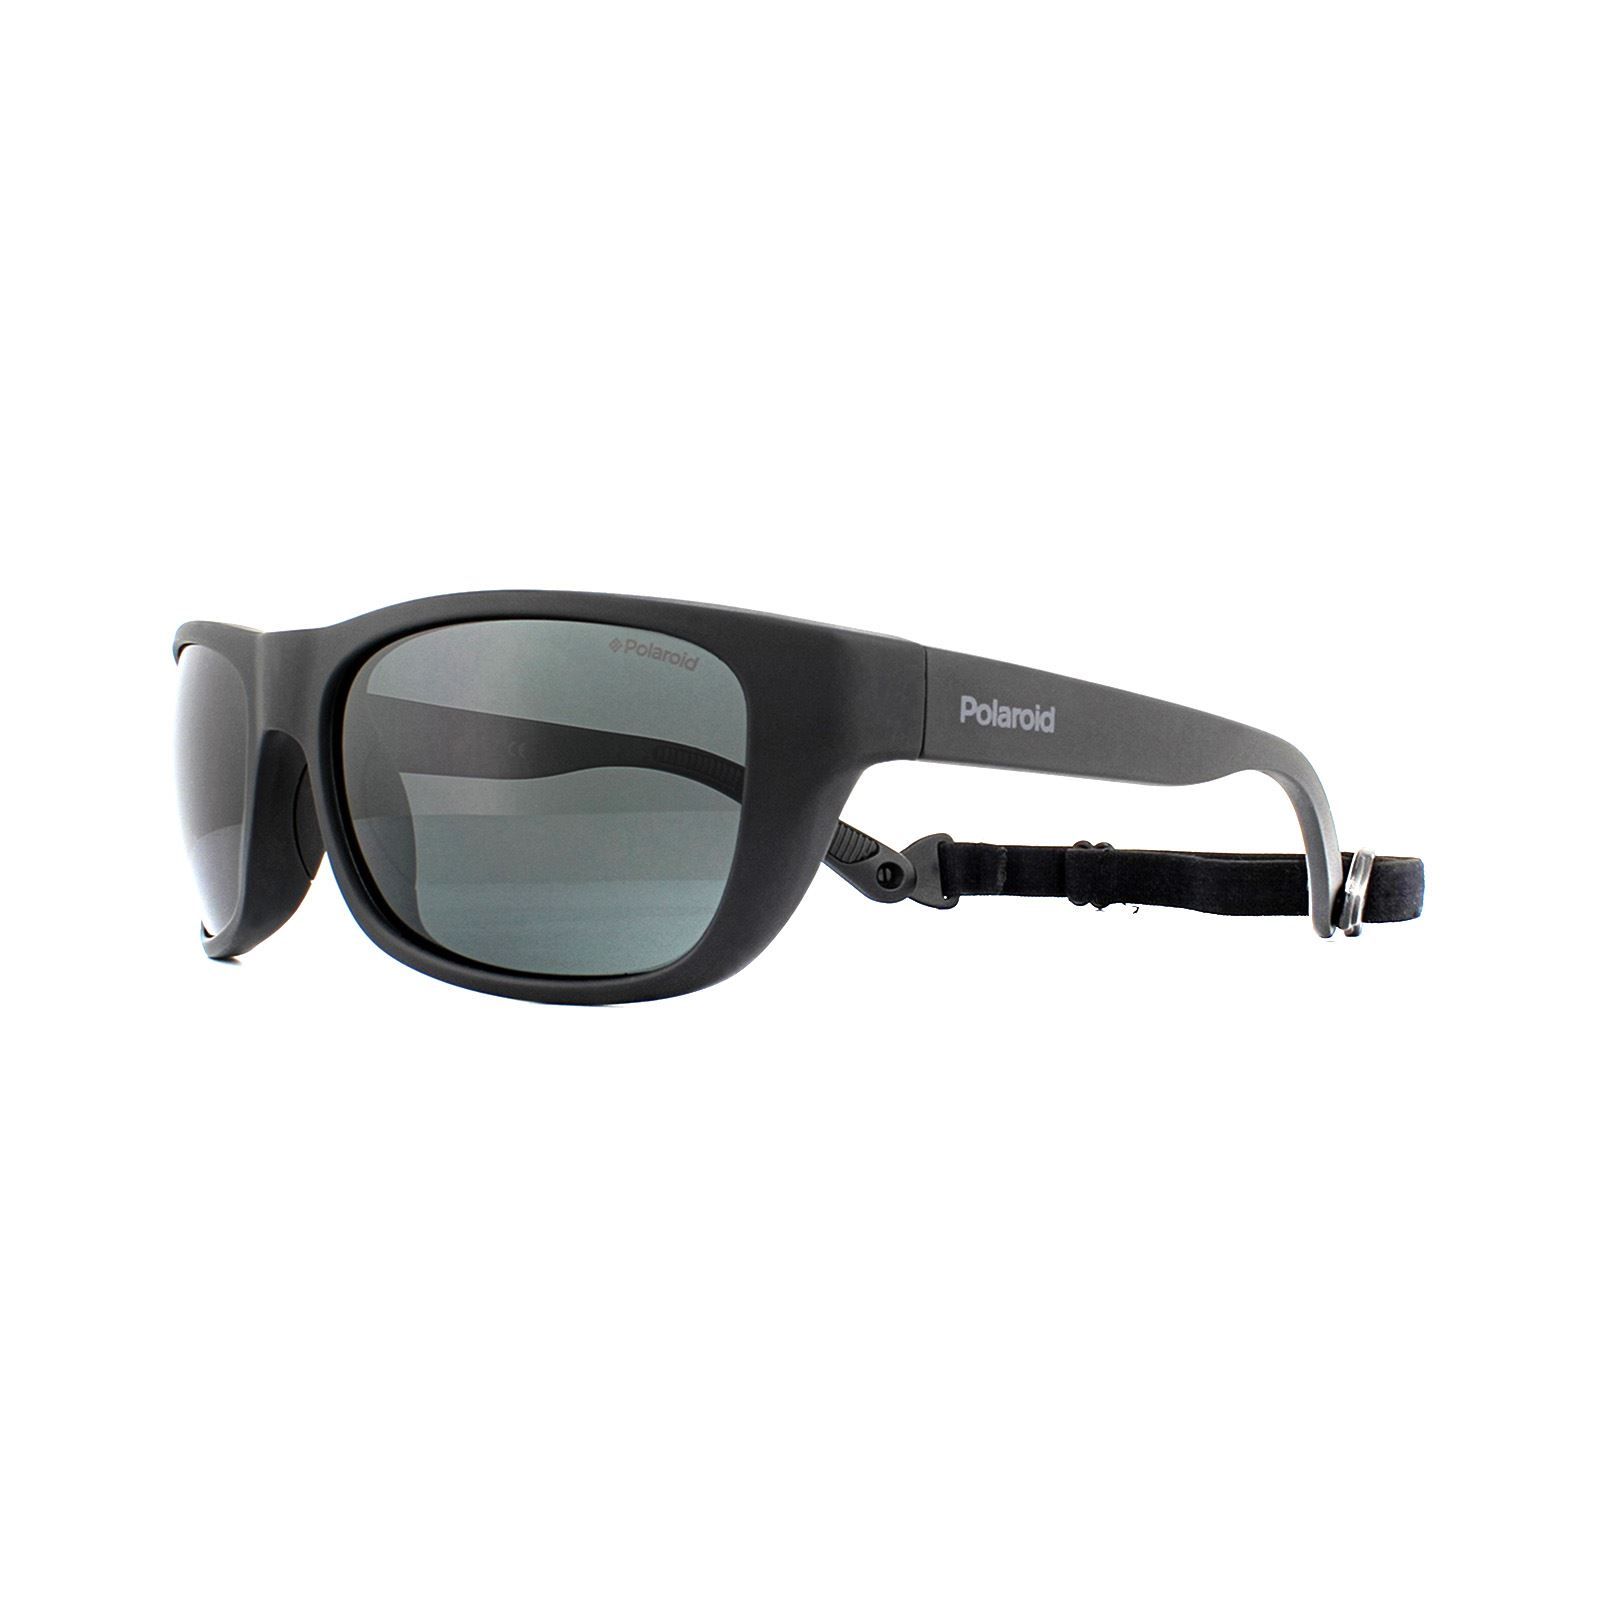 Polaroid Sport Sunglasses 7030/S 003 M9 Matte Black Grey Polarized are a sports style with a strap to hold the sunglasses in place. The lightweight plastic frame is comfortable for long wear and polarized lenses help to reduce glare and protect the eyes.